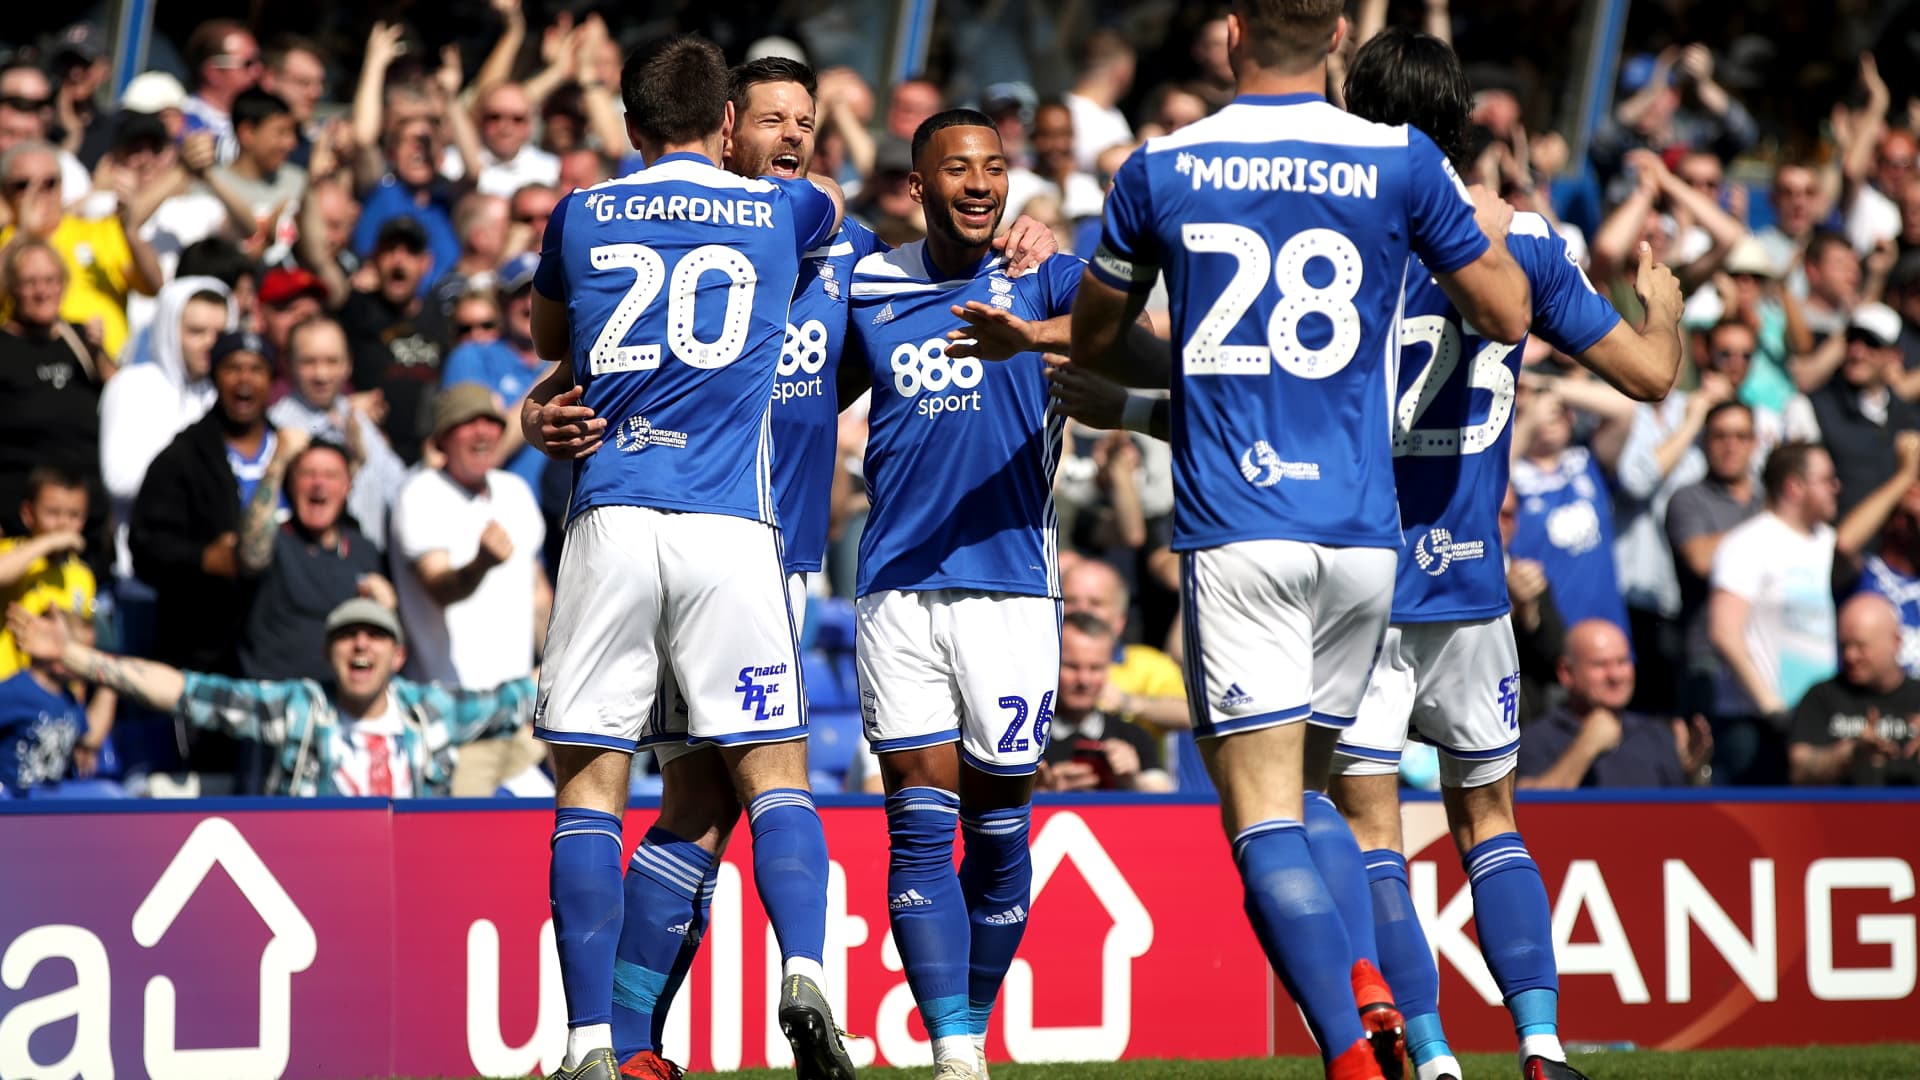 BIRMINGHAM, UK - Birmingham City's Lukas Jutkiewicz (second left) celebrates scoring his side's first goal of the game with team-mates during the Sky Bet Championship match at St Andrew's Trillion Trophy Stadium, Birmingham.